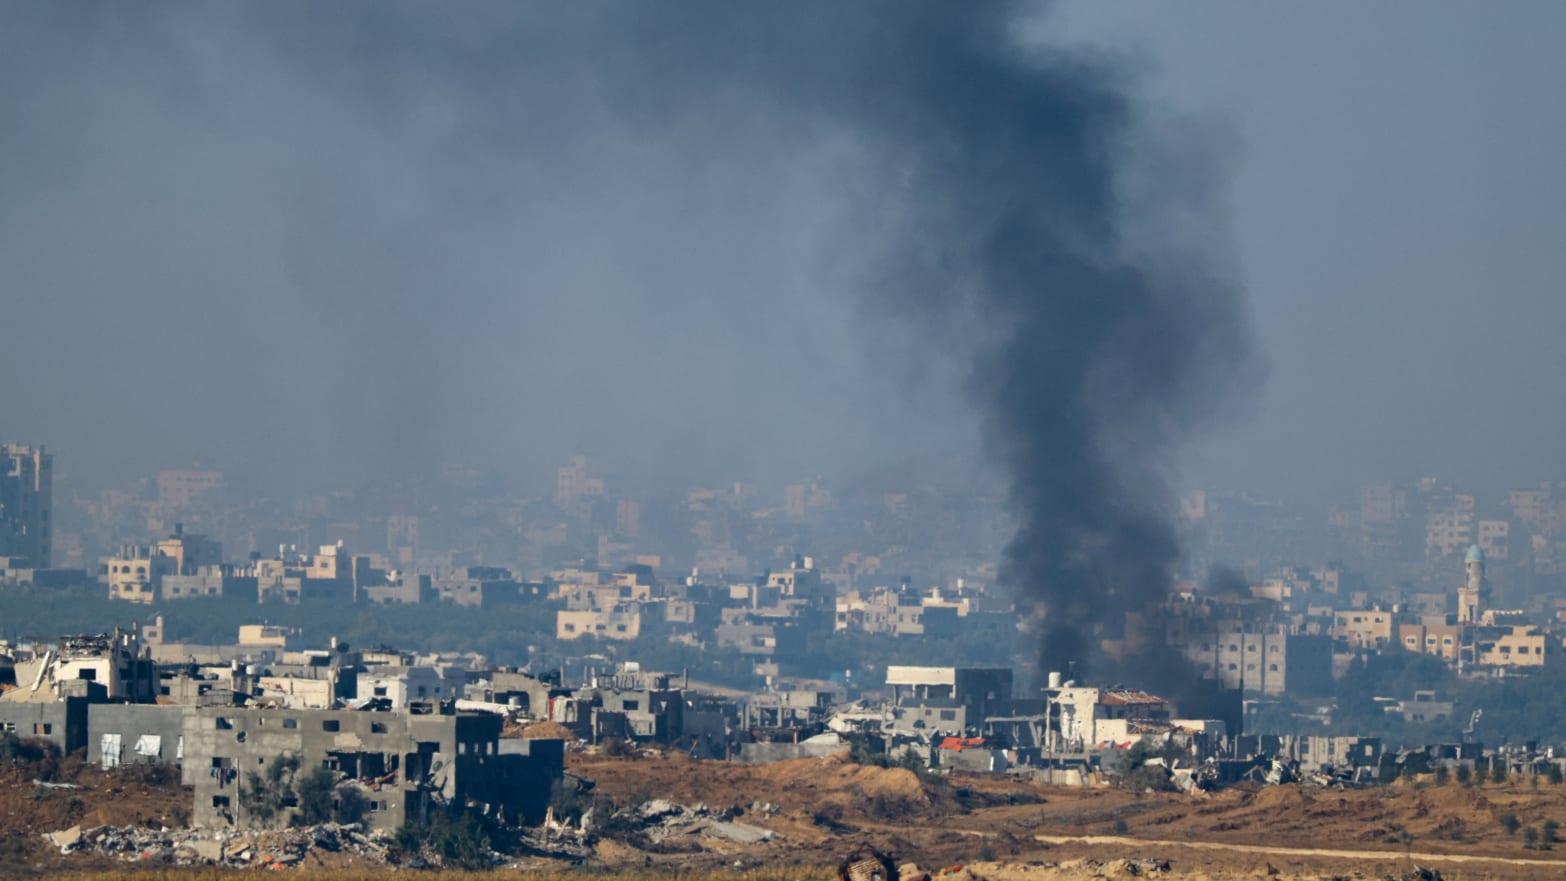 Smoke rises from damaged buildings in Gaza.